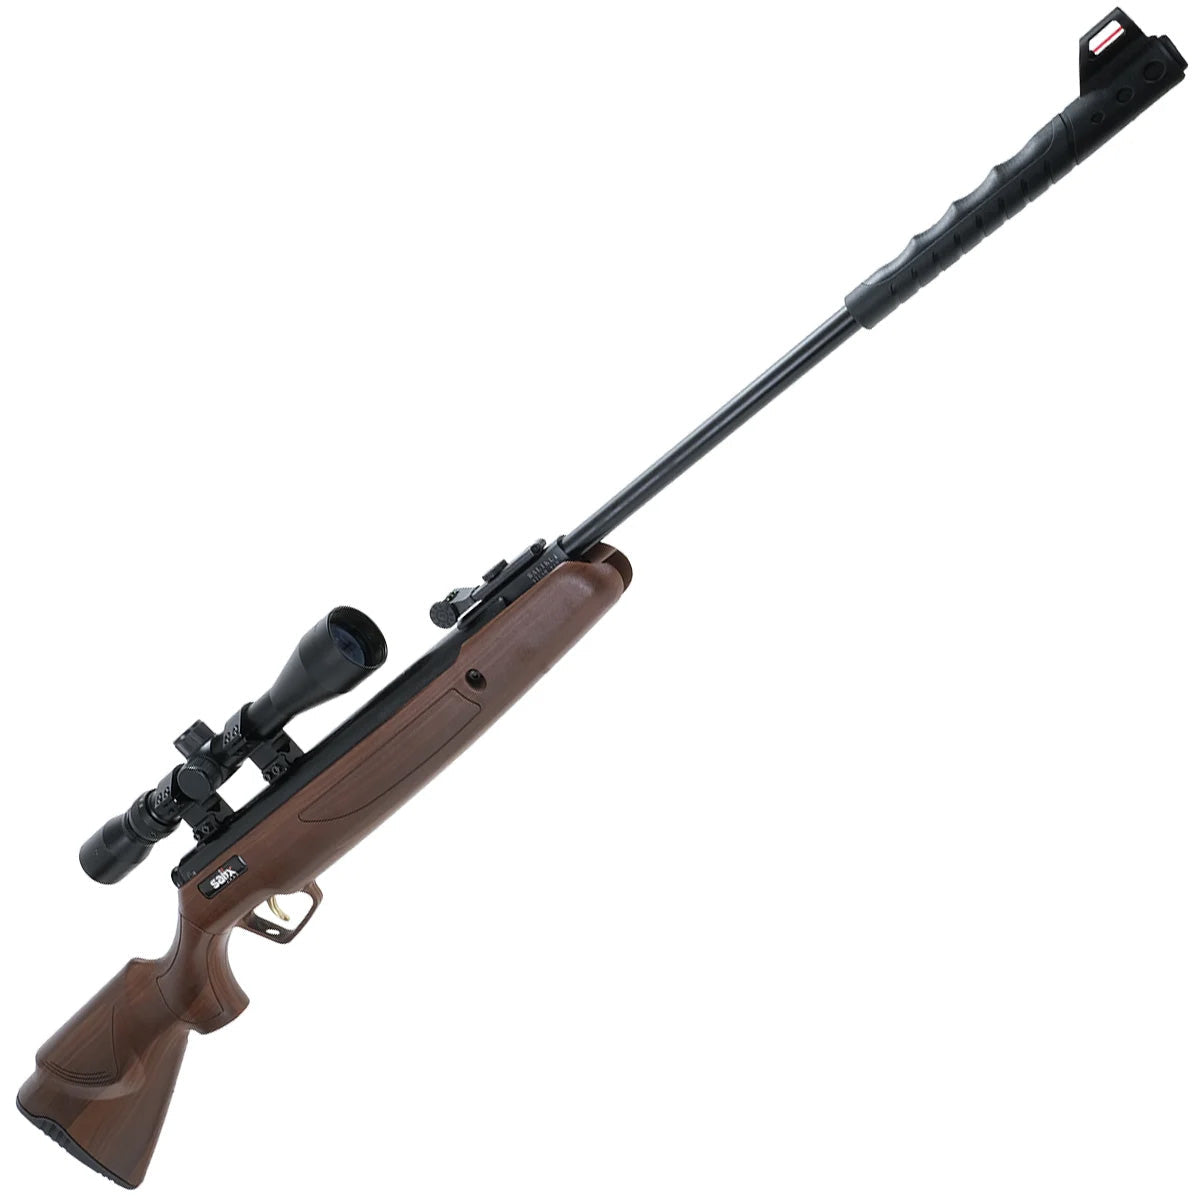 SALIX, TRIMEX ARMS TX02 BREAK BARREL SPRING AIR RIFLE WITH SYNTHETIC WOOD LOOK STOCK .22